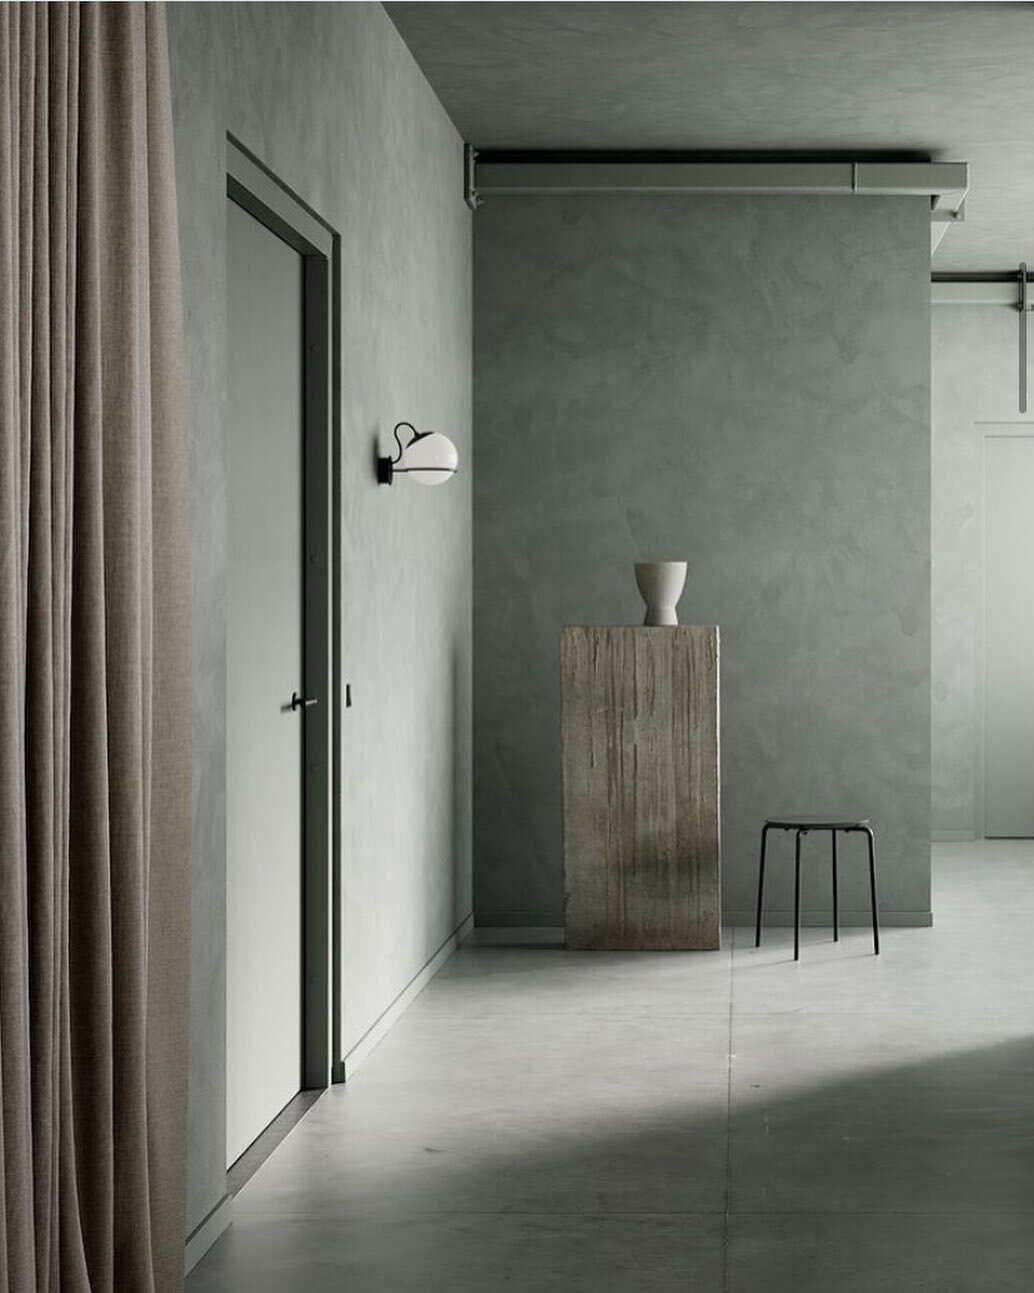 @detalecph &mdash; What I want to cover every surface with these days. Now @fluggerofficial has developed a paint collection matching the DETALE CPH colours, which is much welcome for elements such as doors, architraves and panels &mdash; that minty 